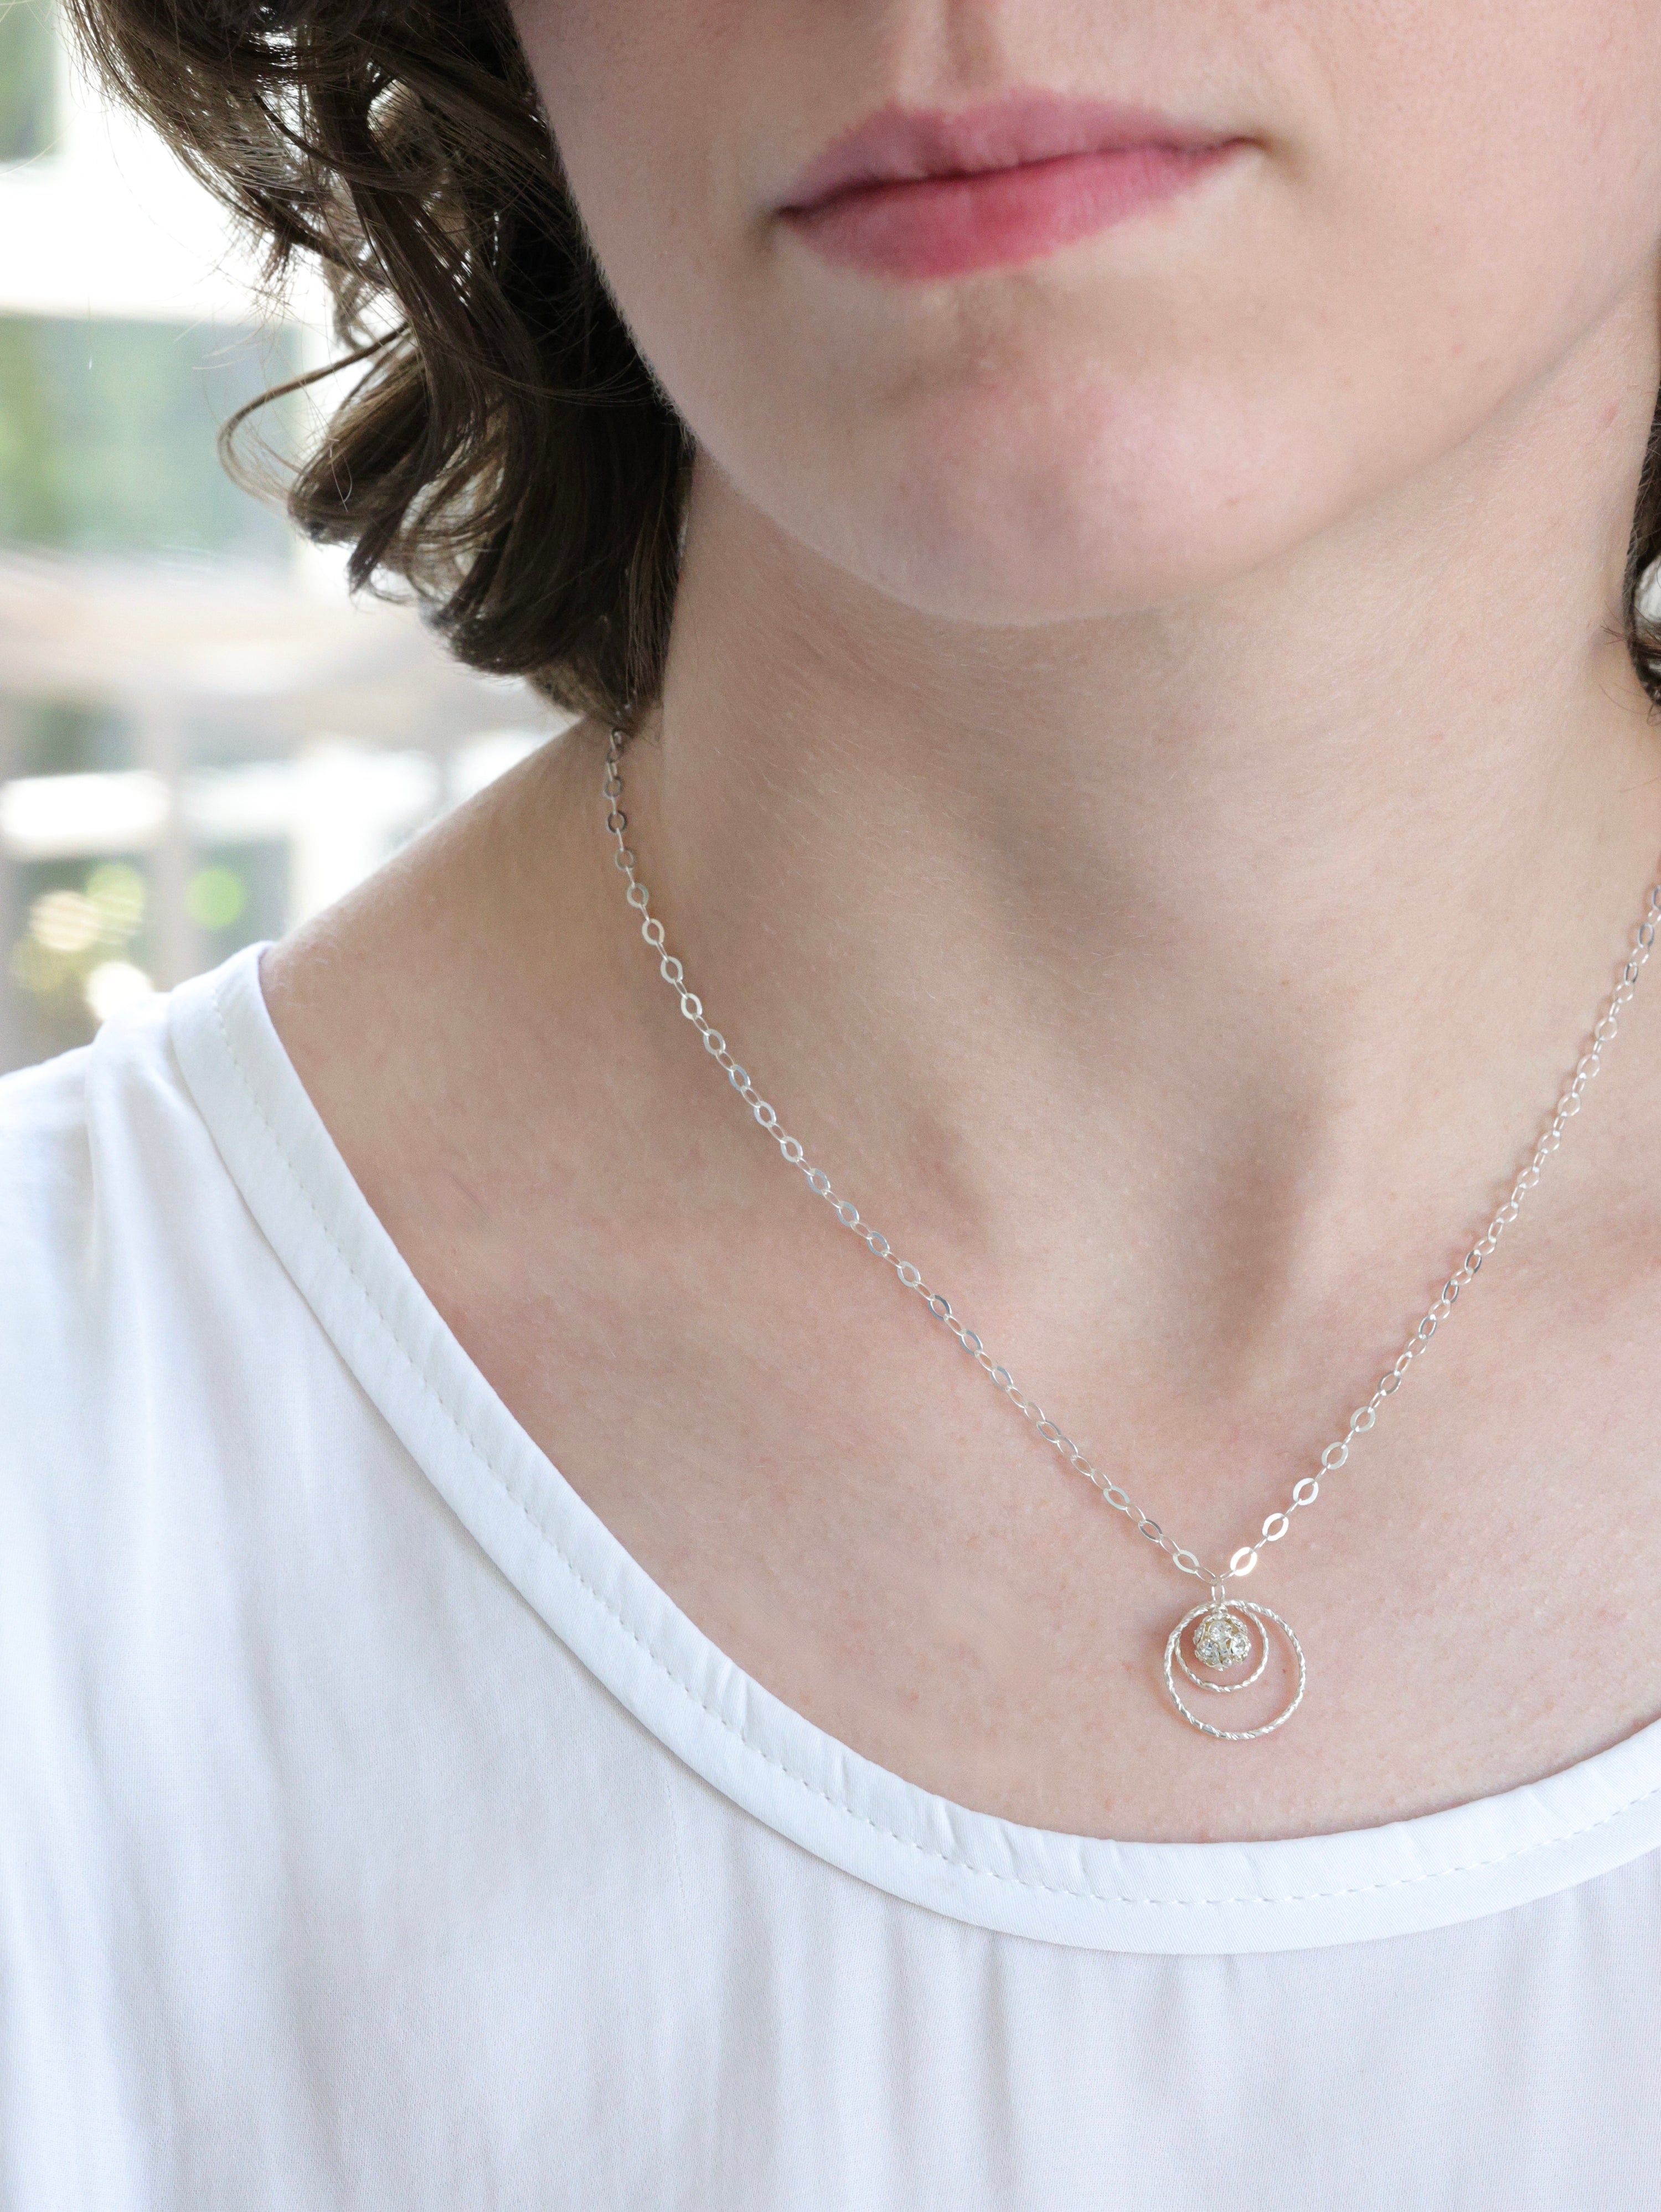 Hope nh Necklace -Sterling Silver